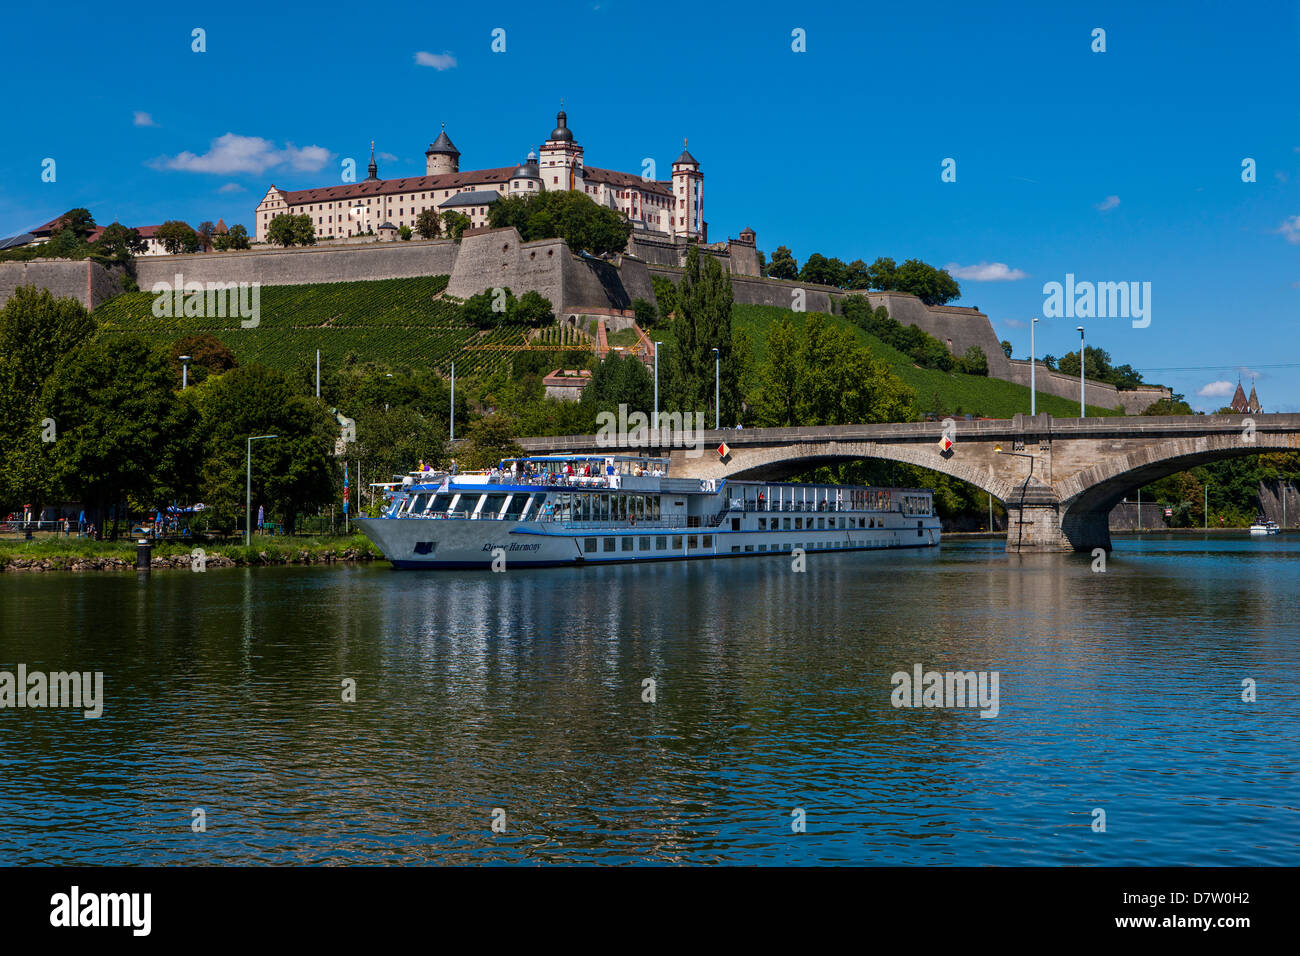 Cruise ship on the Main valley in Wurzburg, beyond Fortress Marienberg, Franconia, Bavaria, Germany Stock Photo